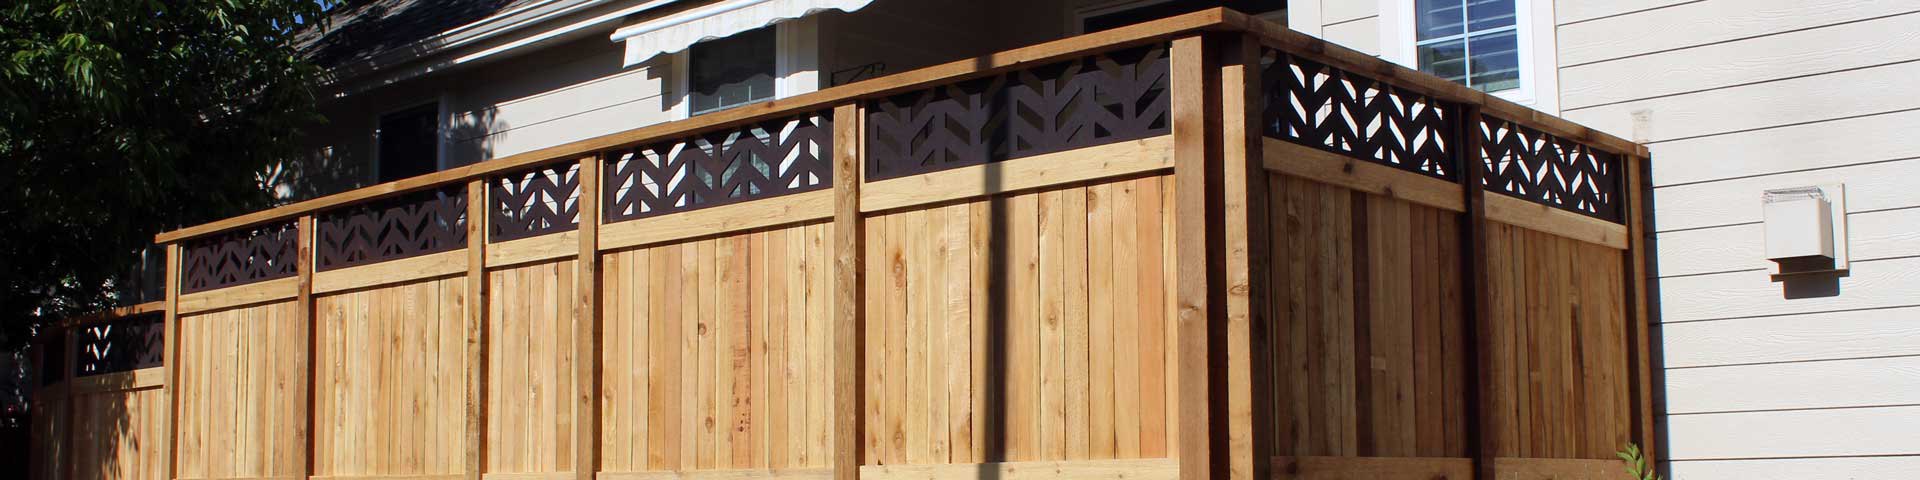 Extensive Options For All of Your Fence Supply Needs